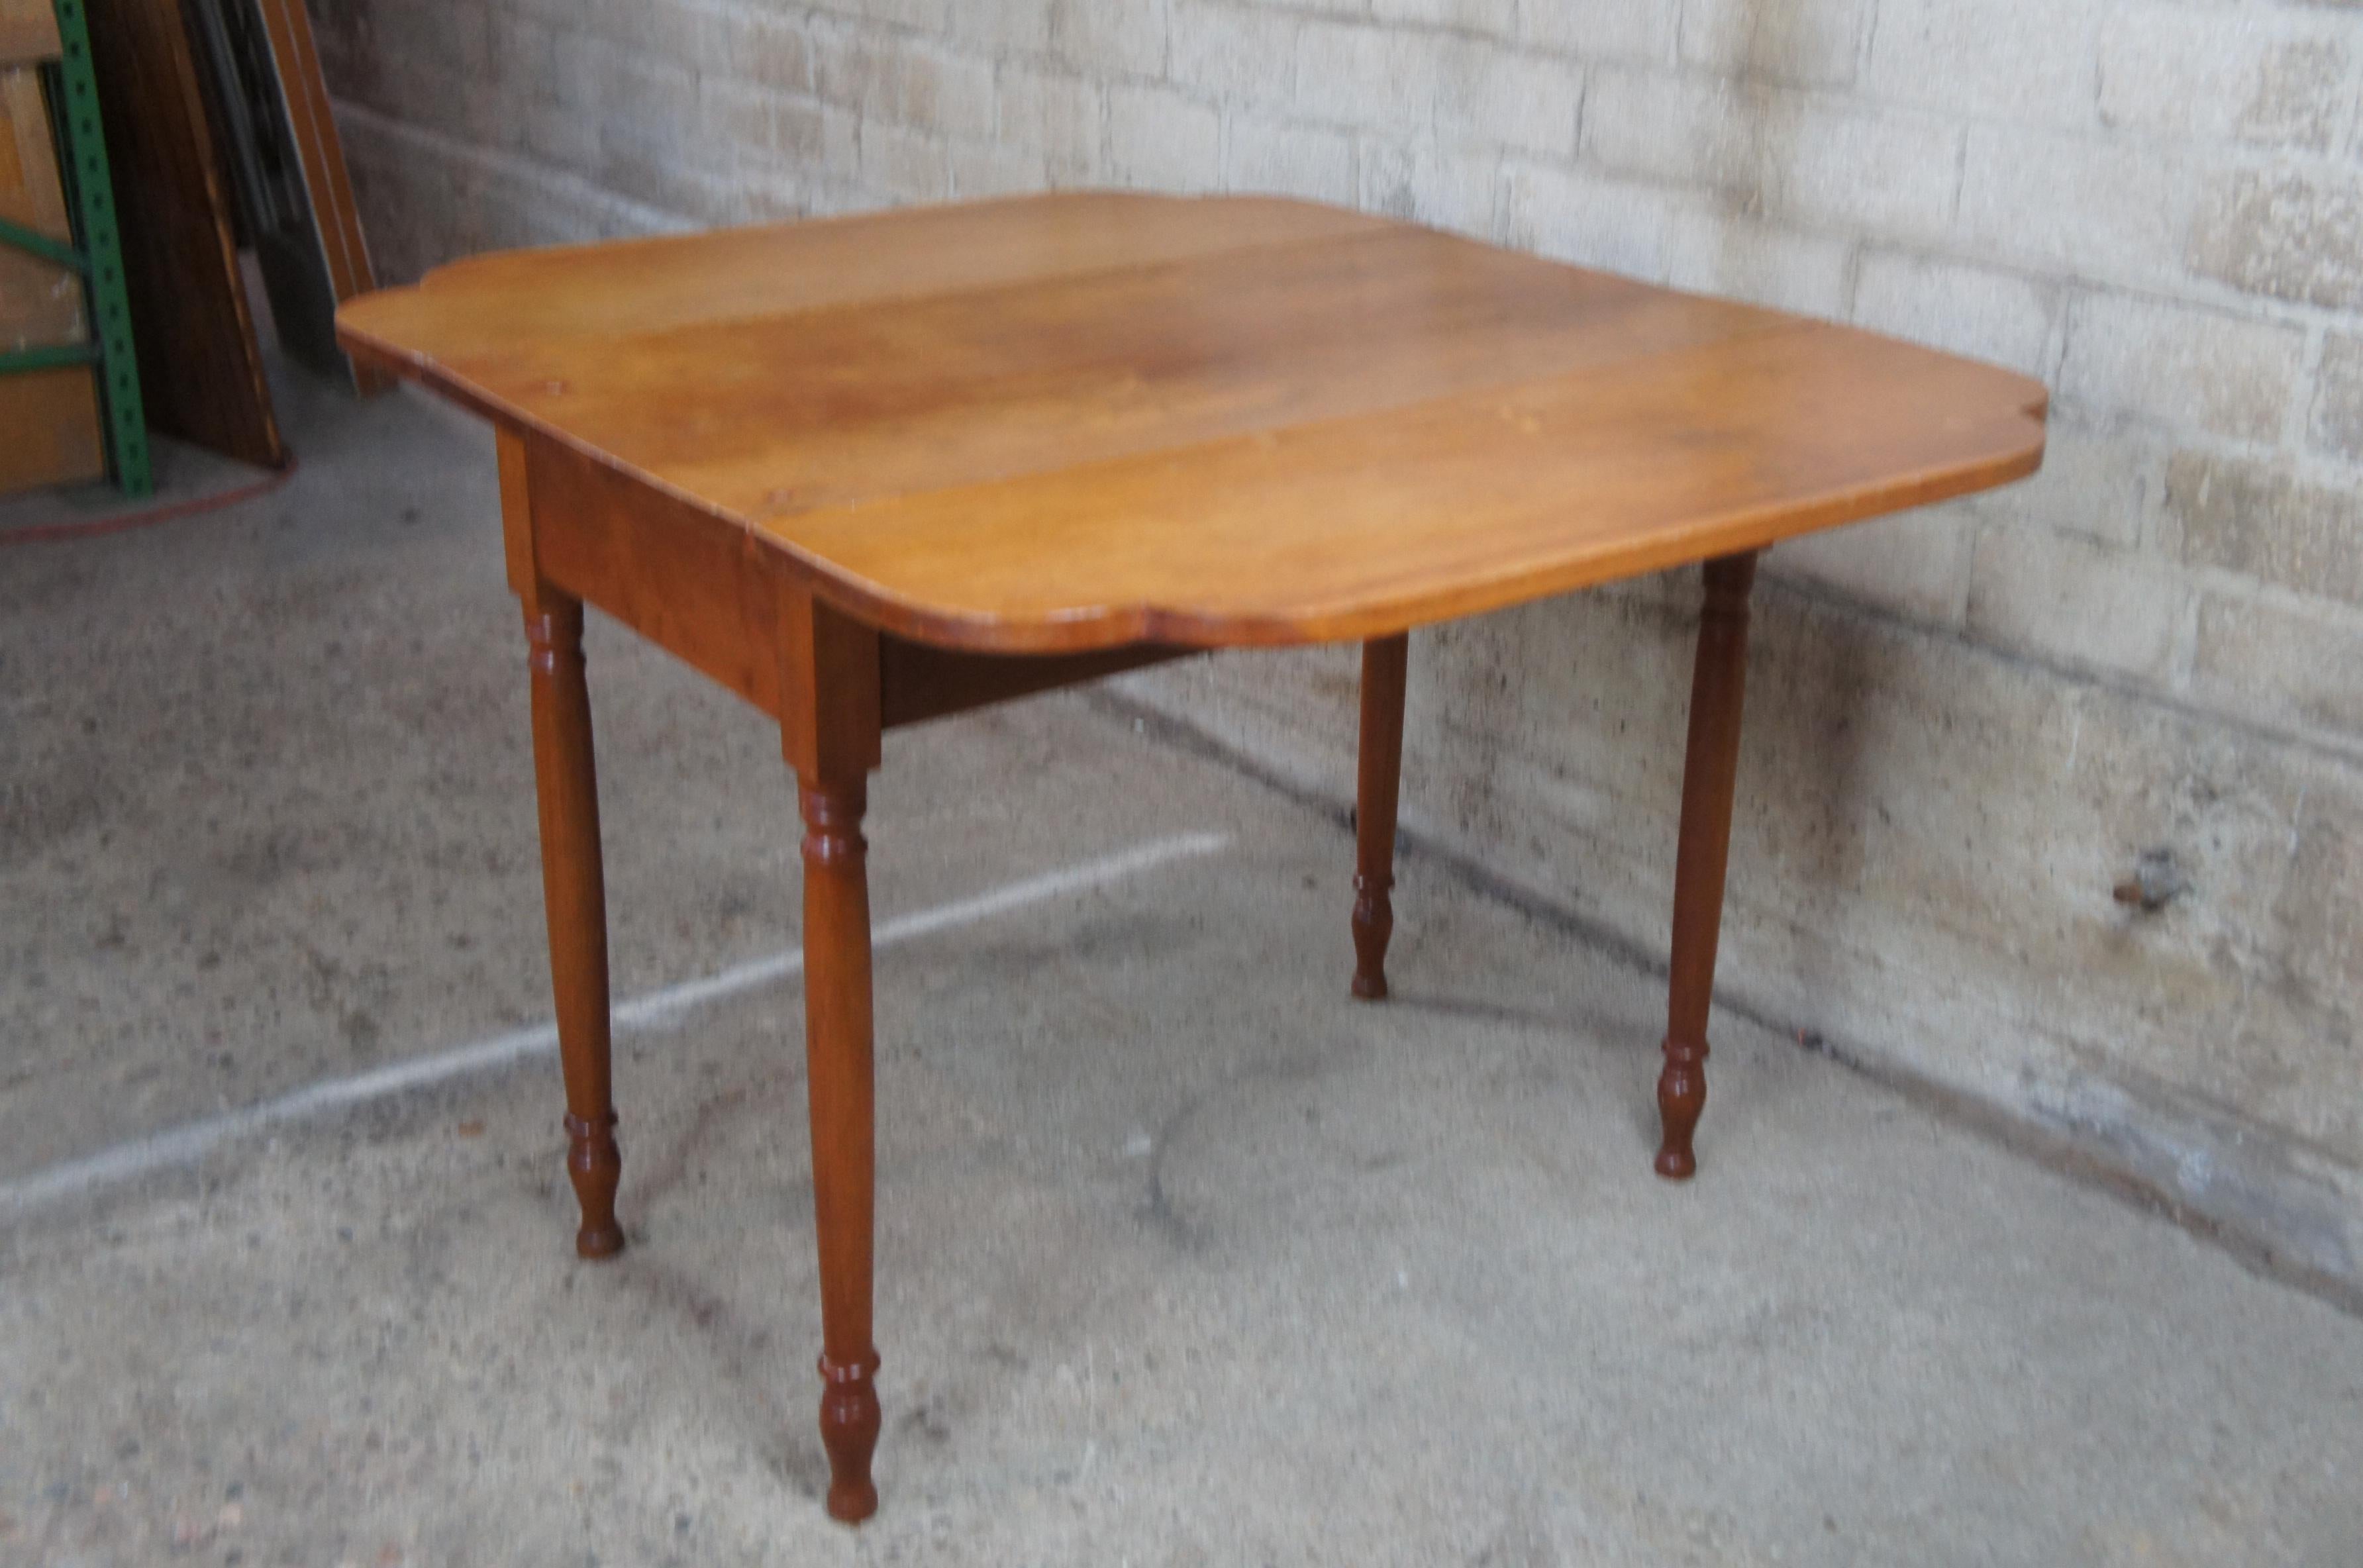 Antique Early American Cherry Drop-Leaf Dining Table Country Farmhouse 5